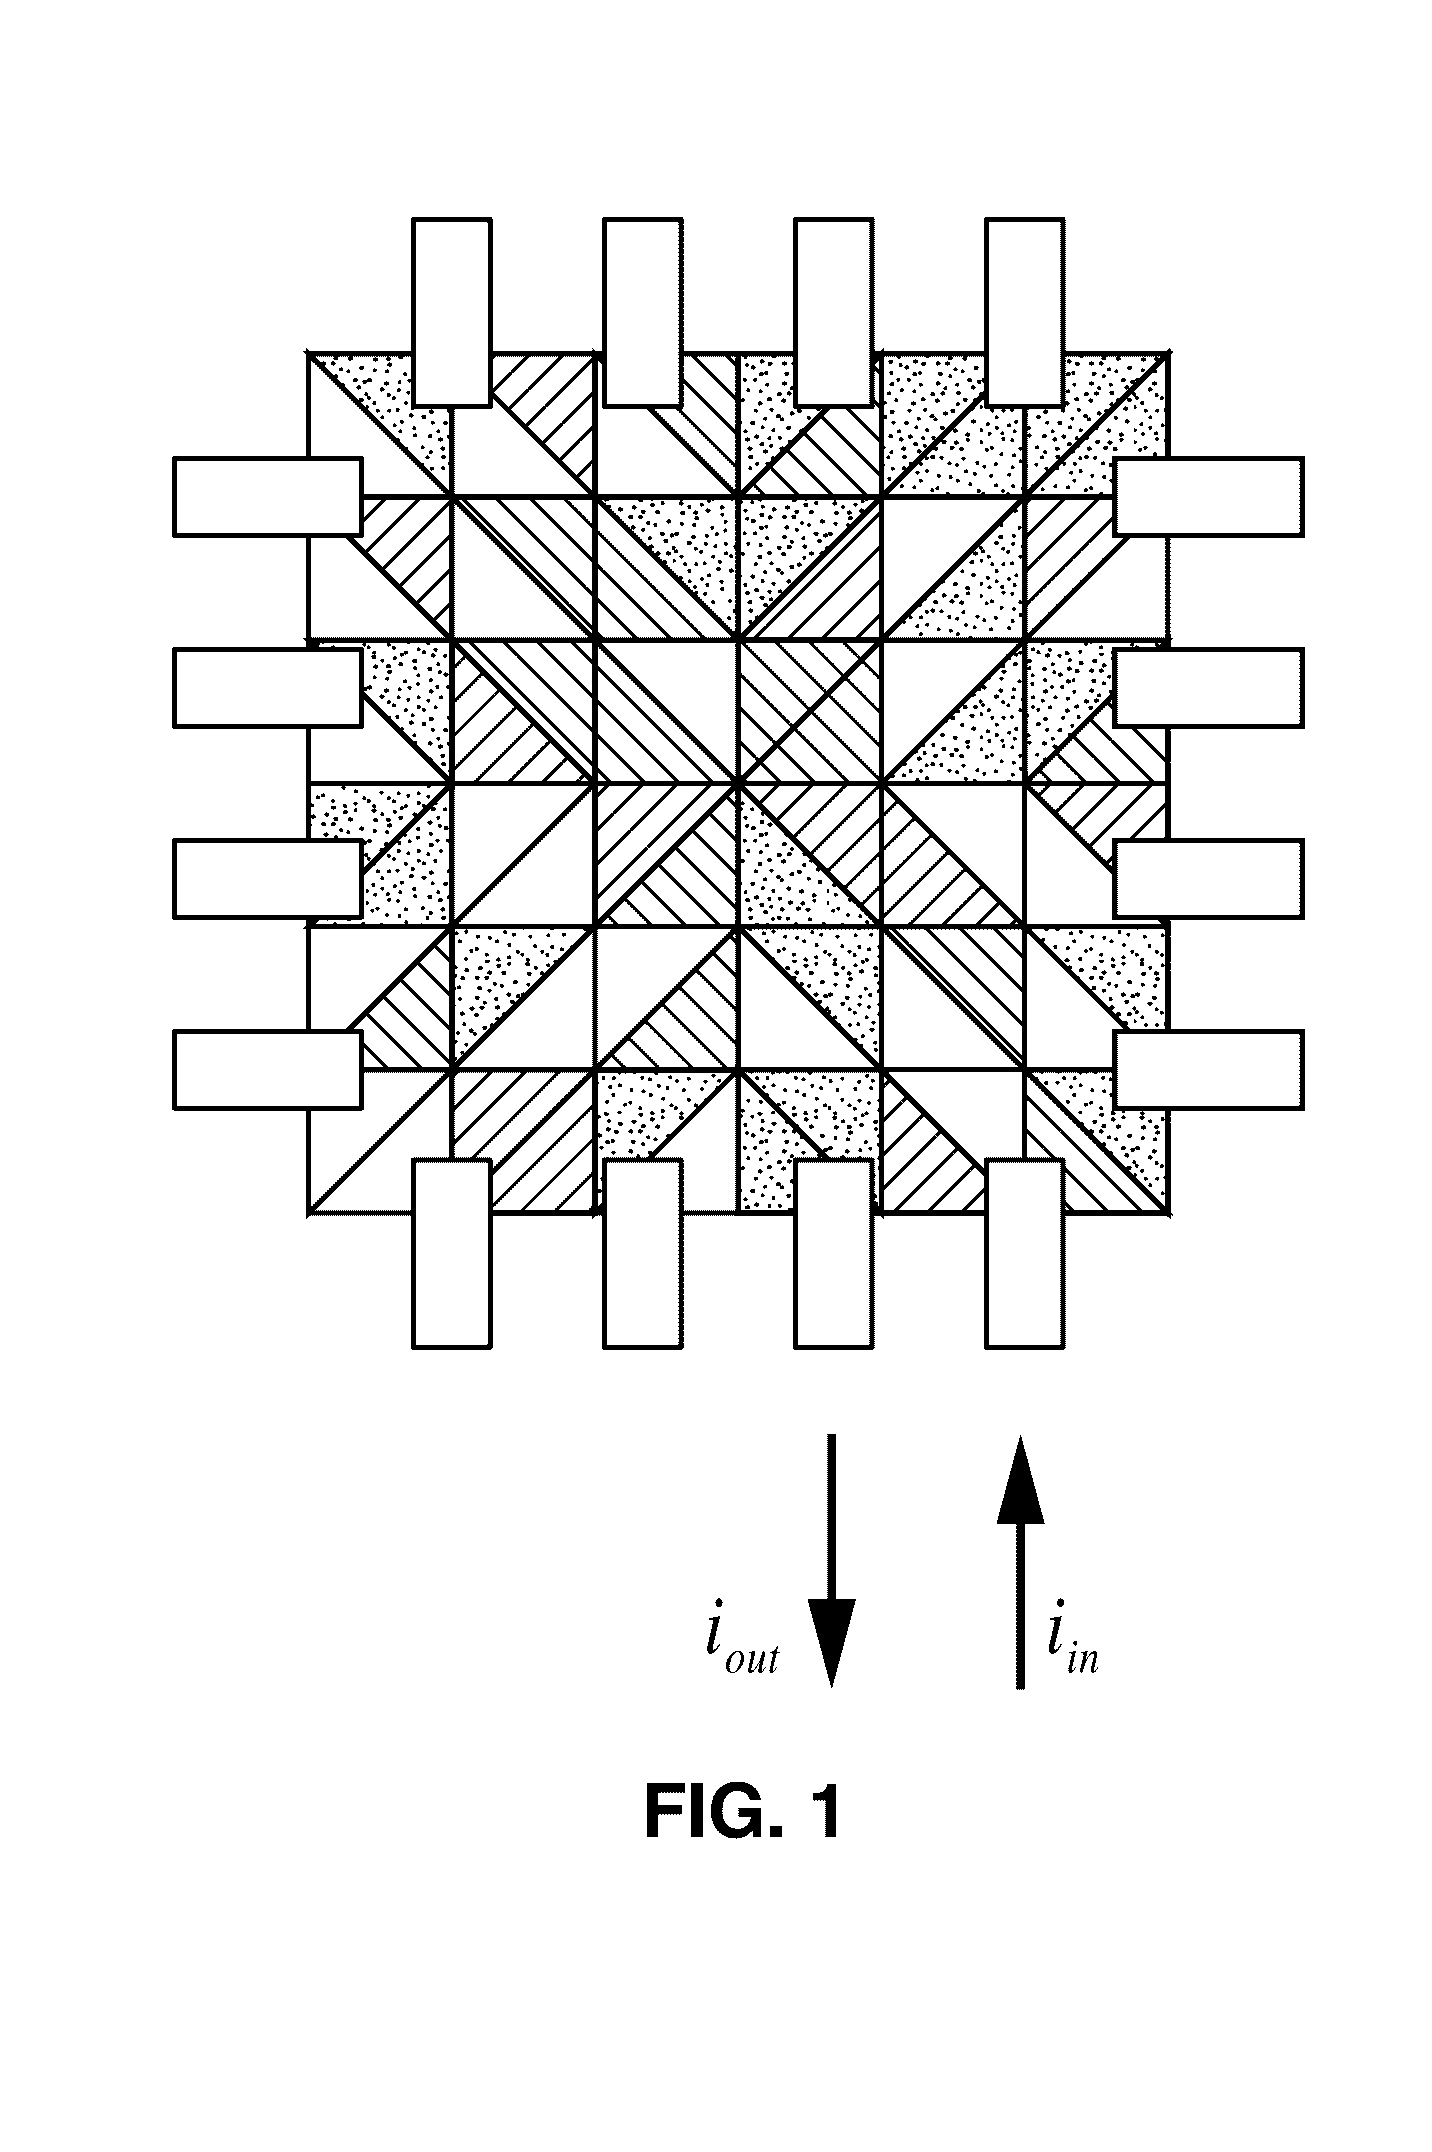 Multifunctional cement composites with load-bearing and self-sensing properties